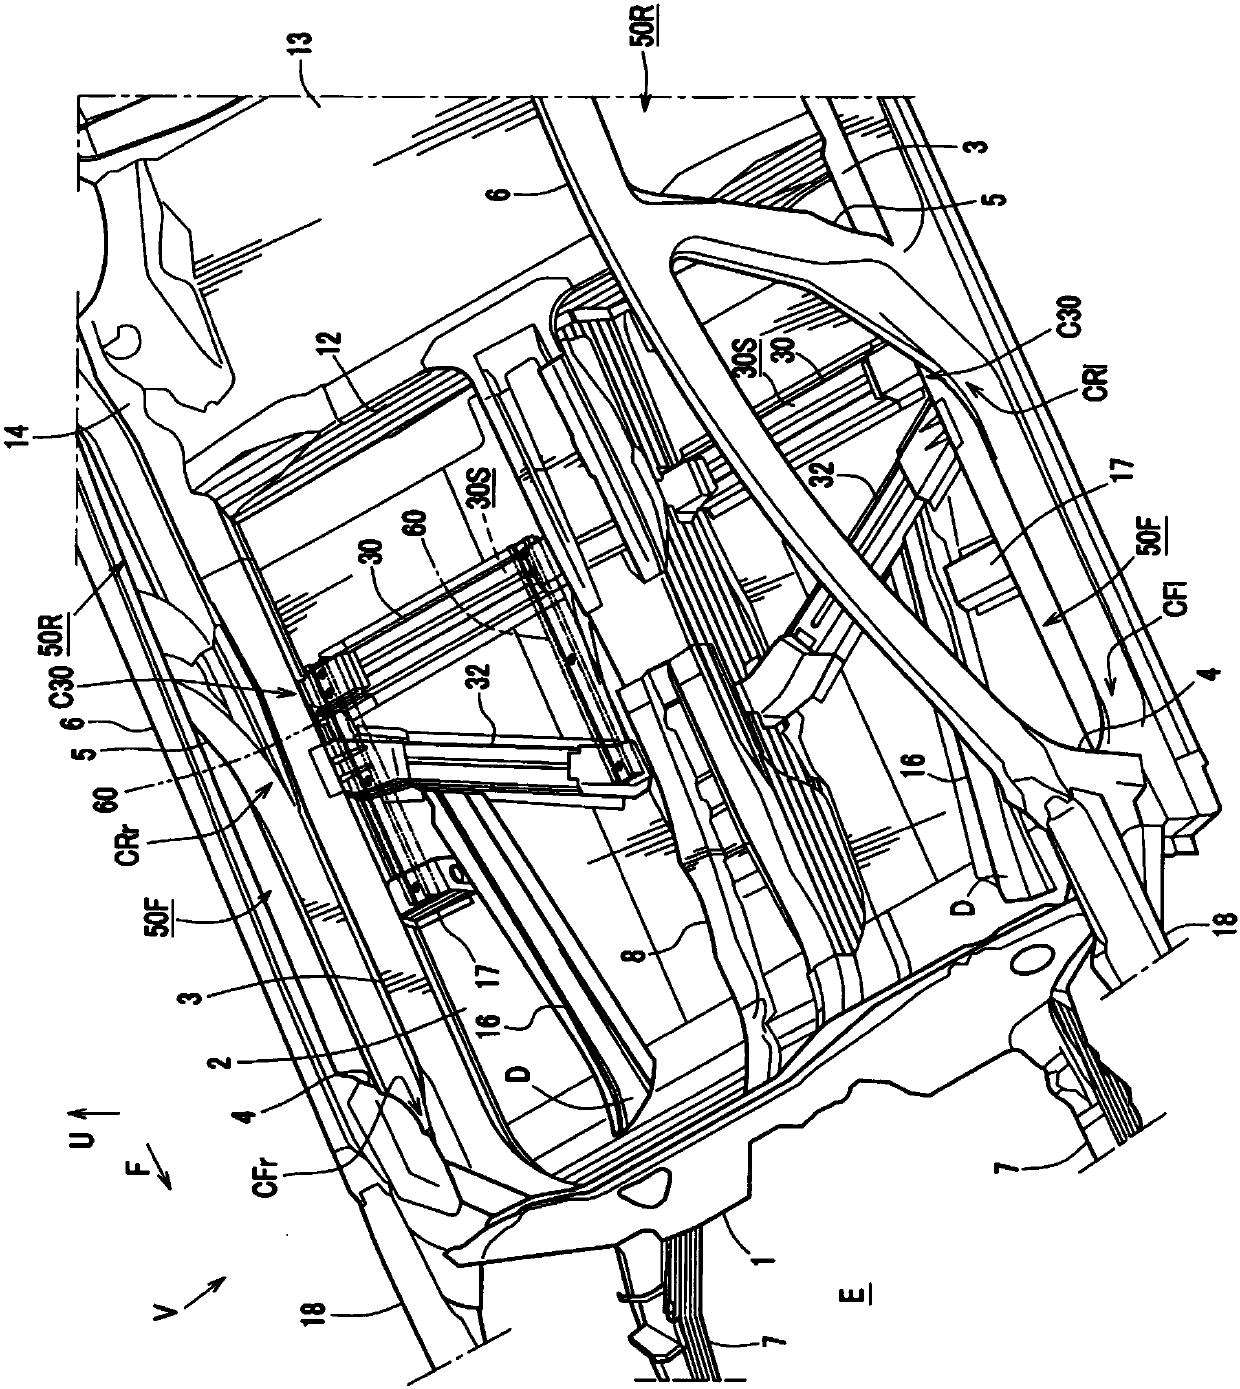 Underbody structure of the vehicle